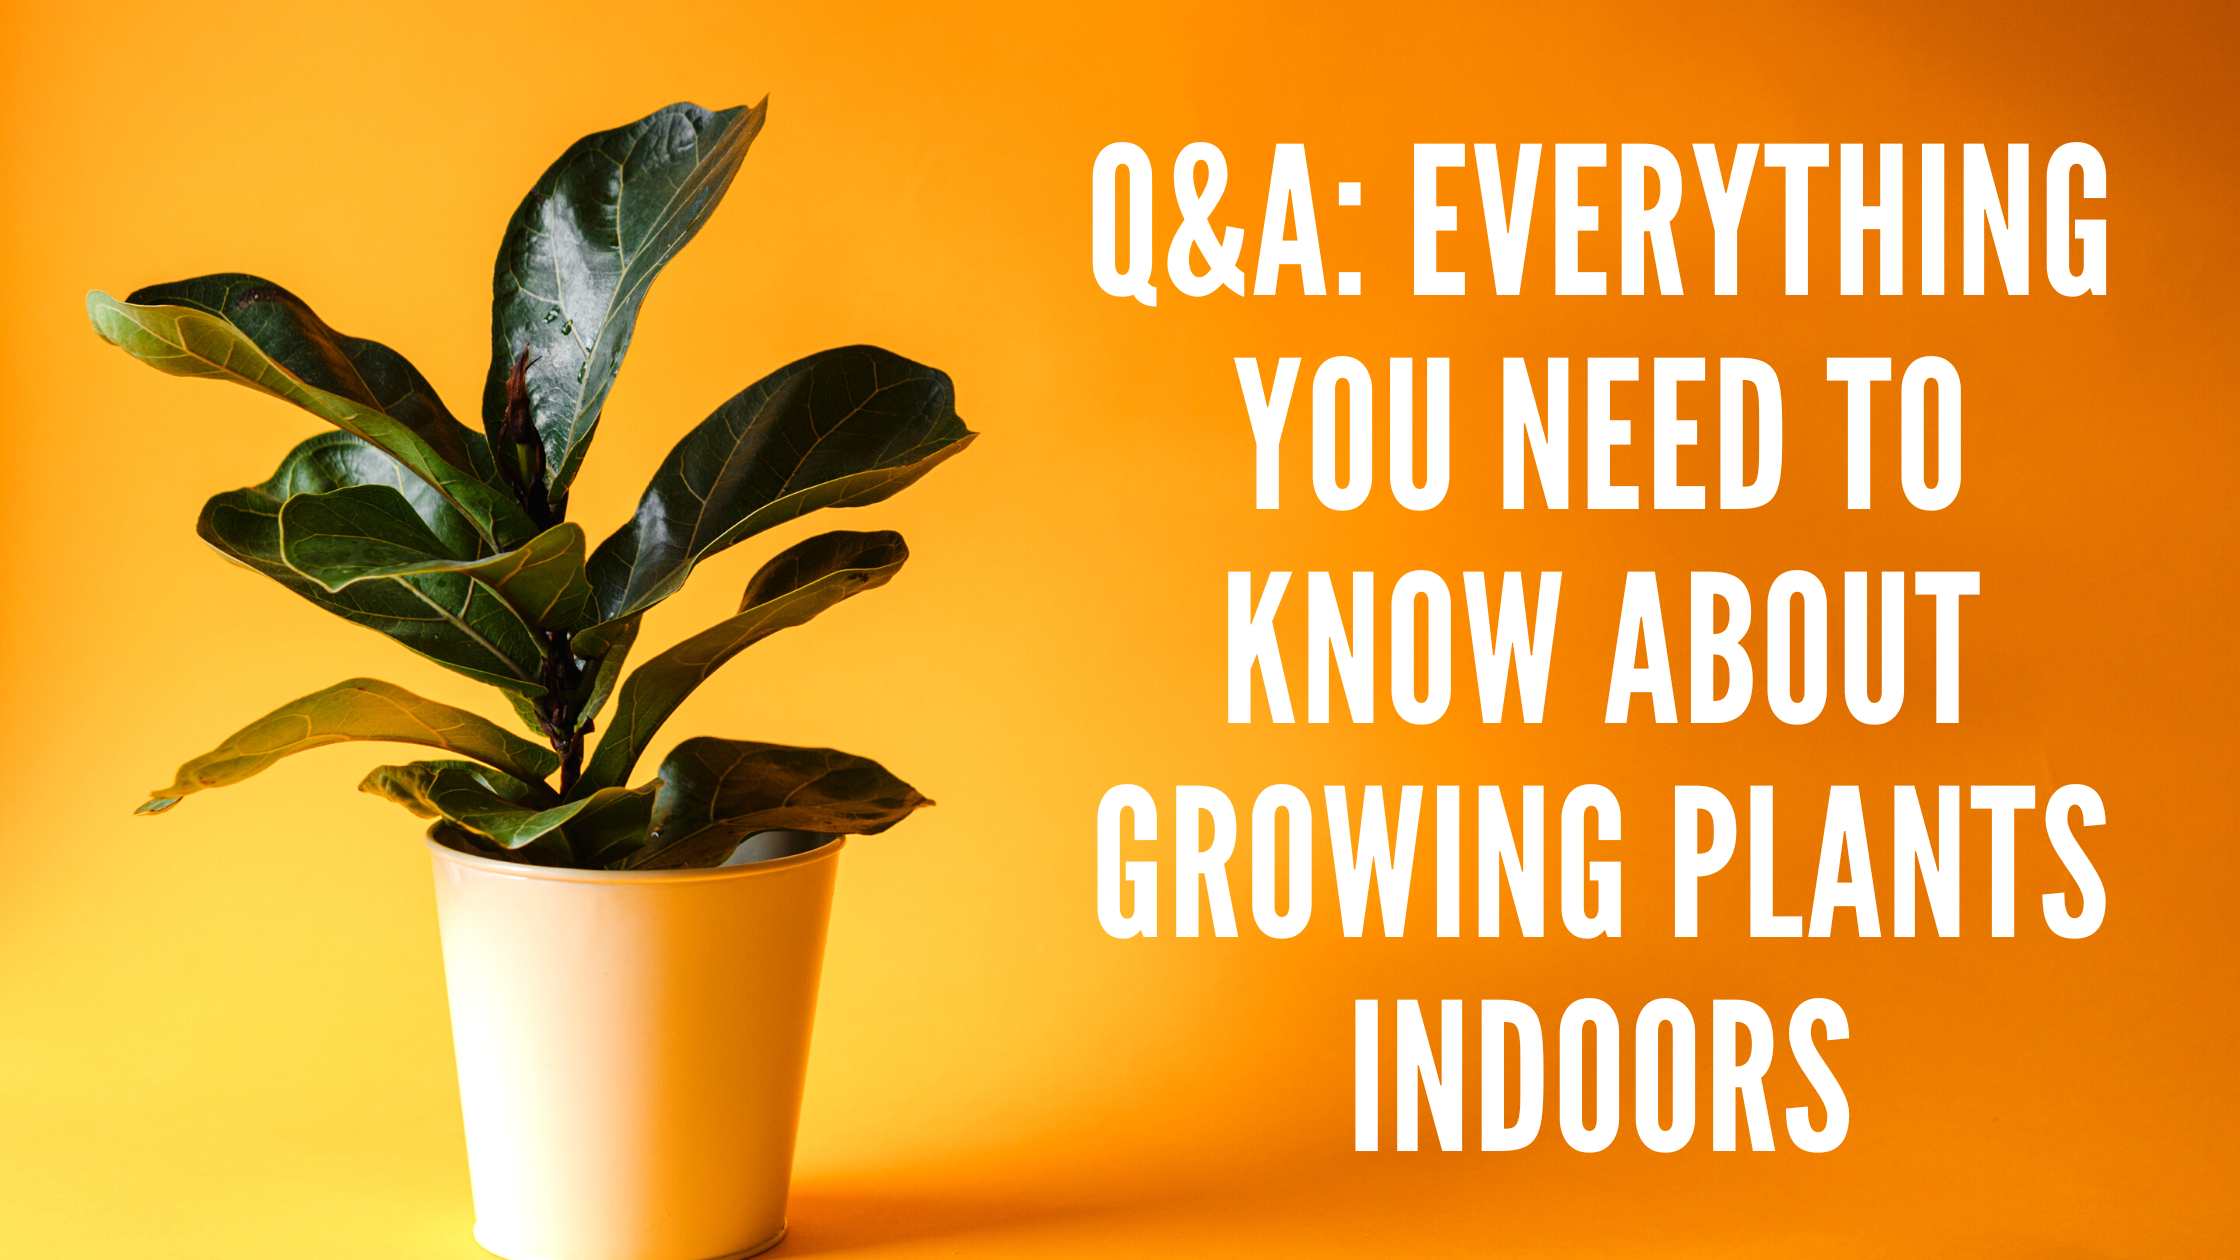 Q&A: Everything You Need to Know About Growing Plants Indoors